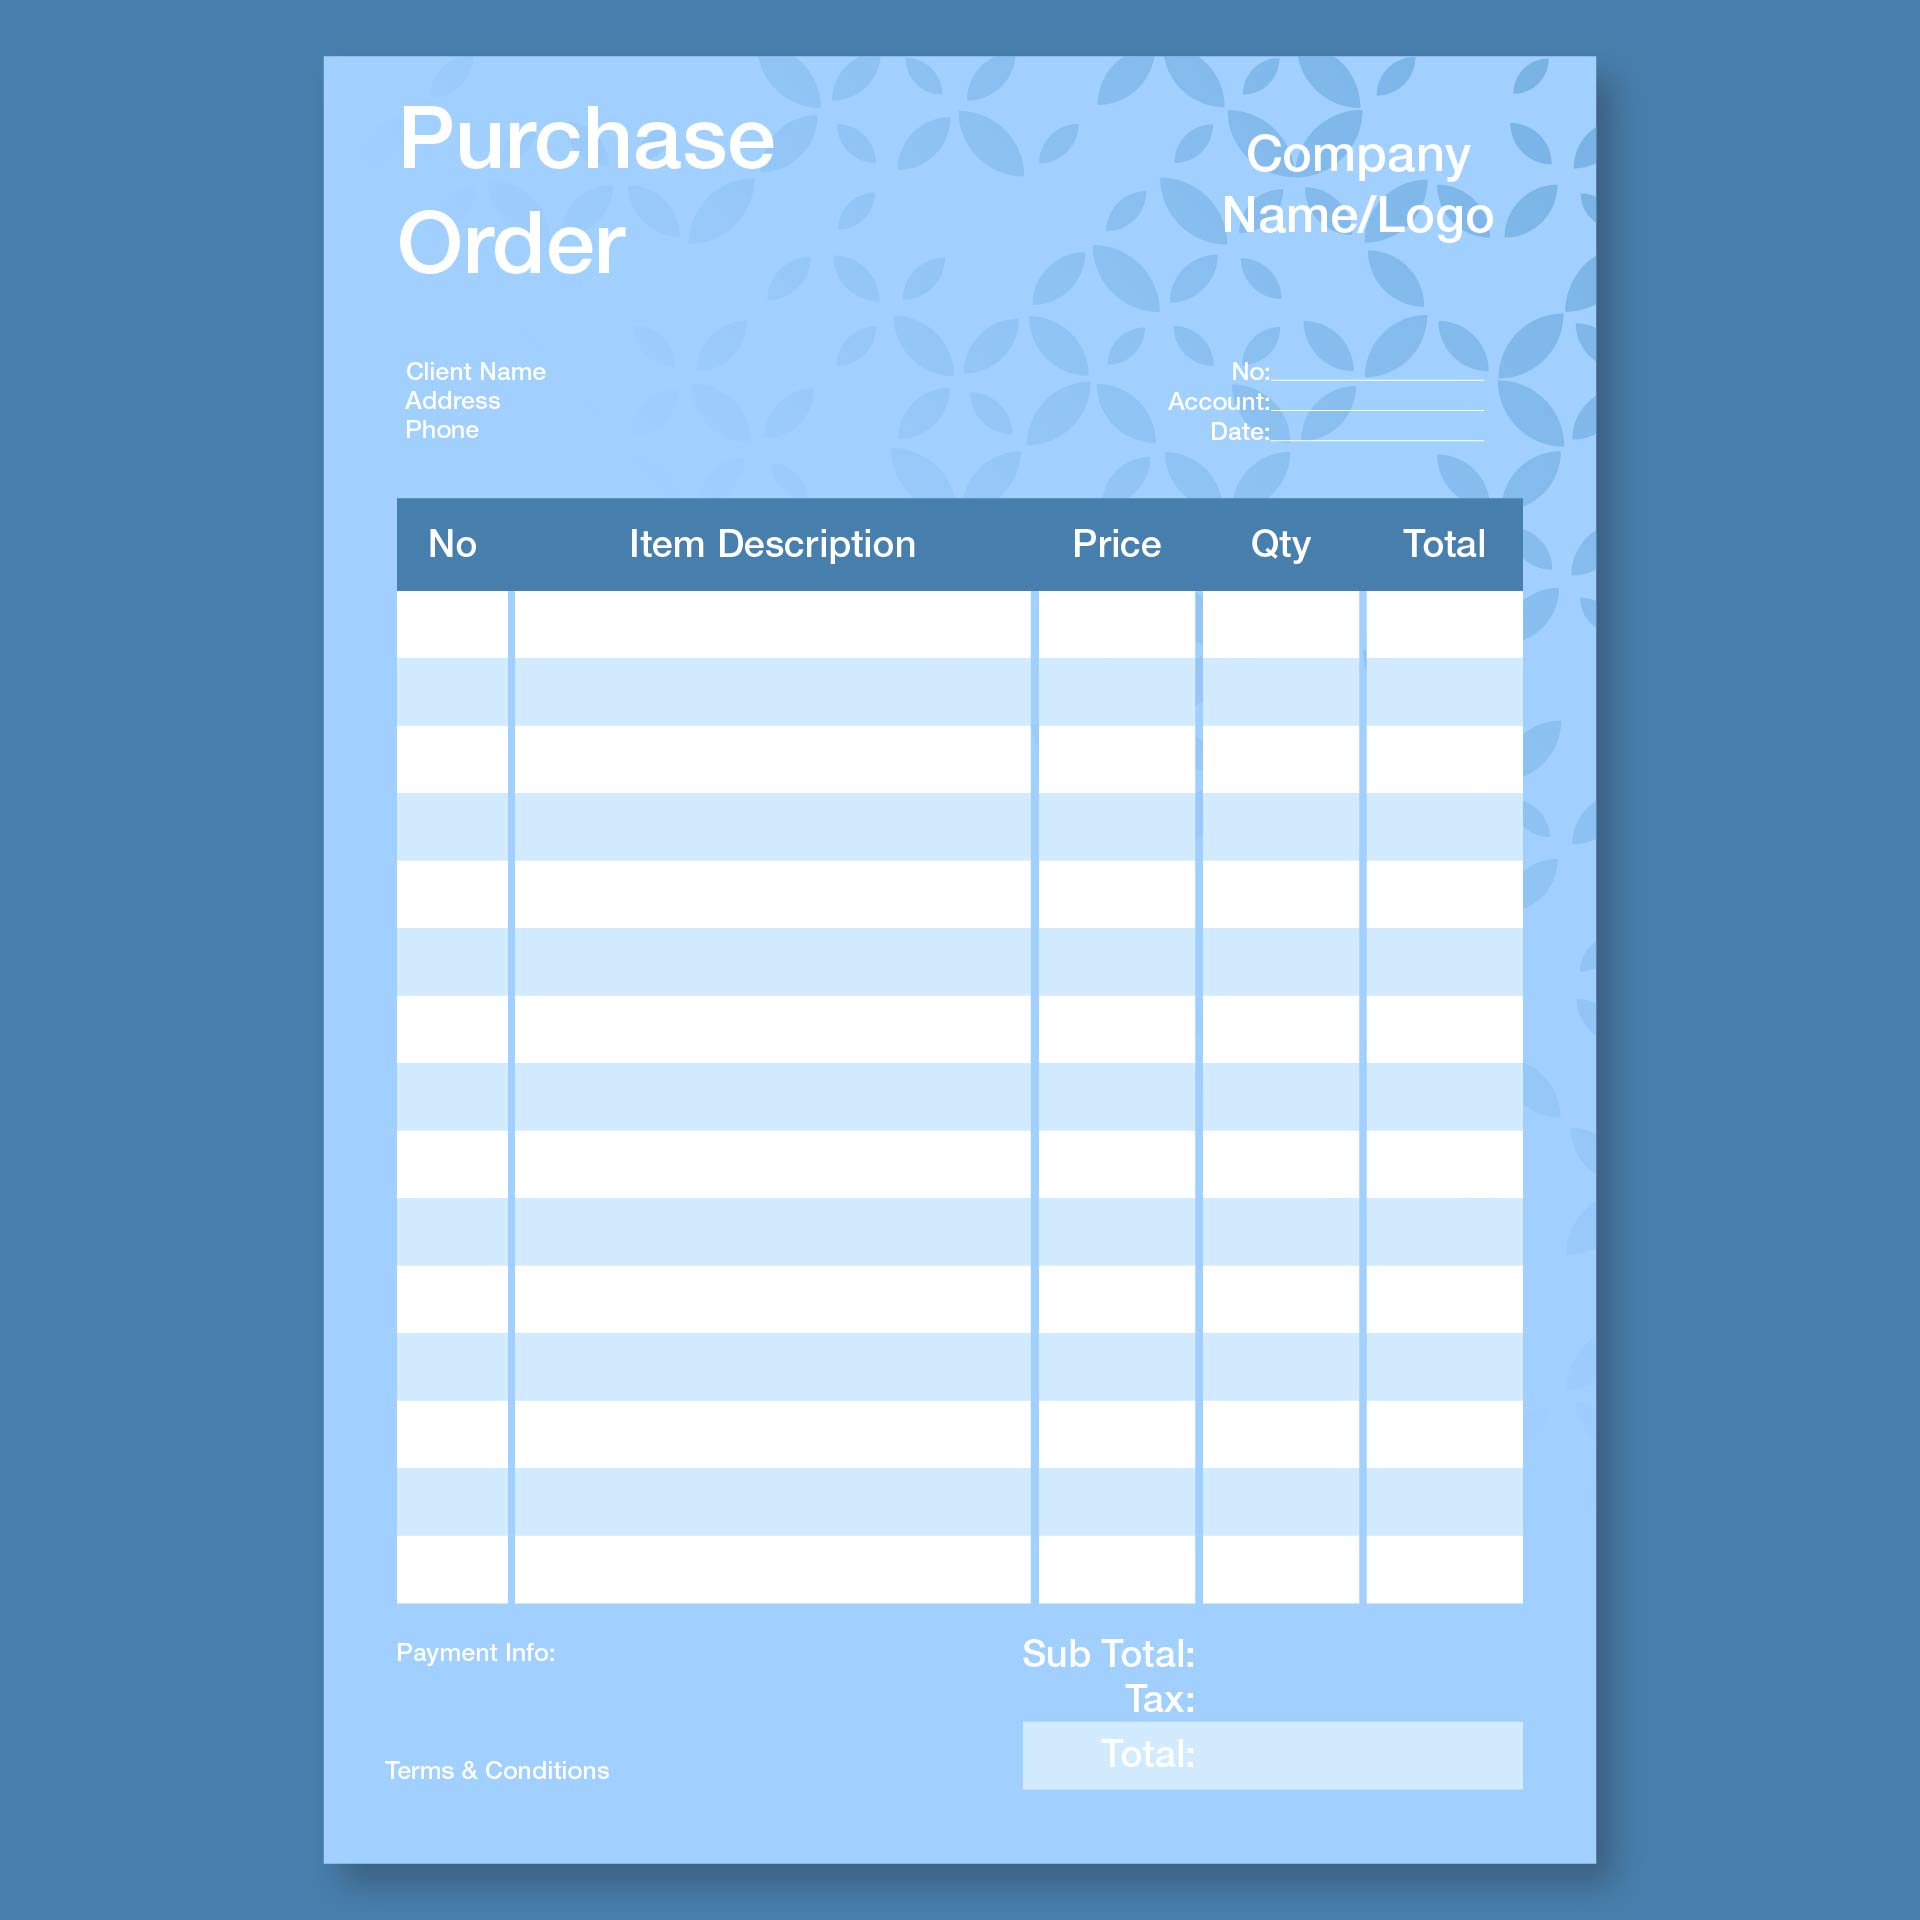 Printable Purchase Order Form for Small Business